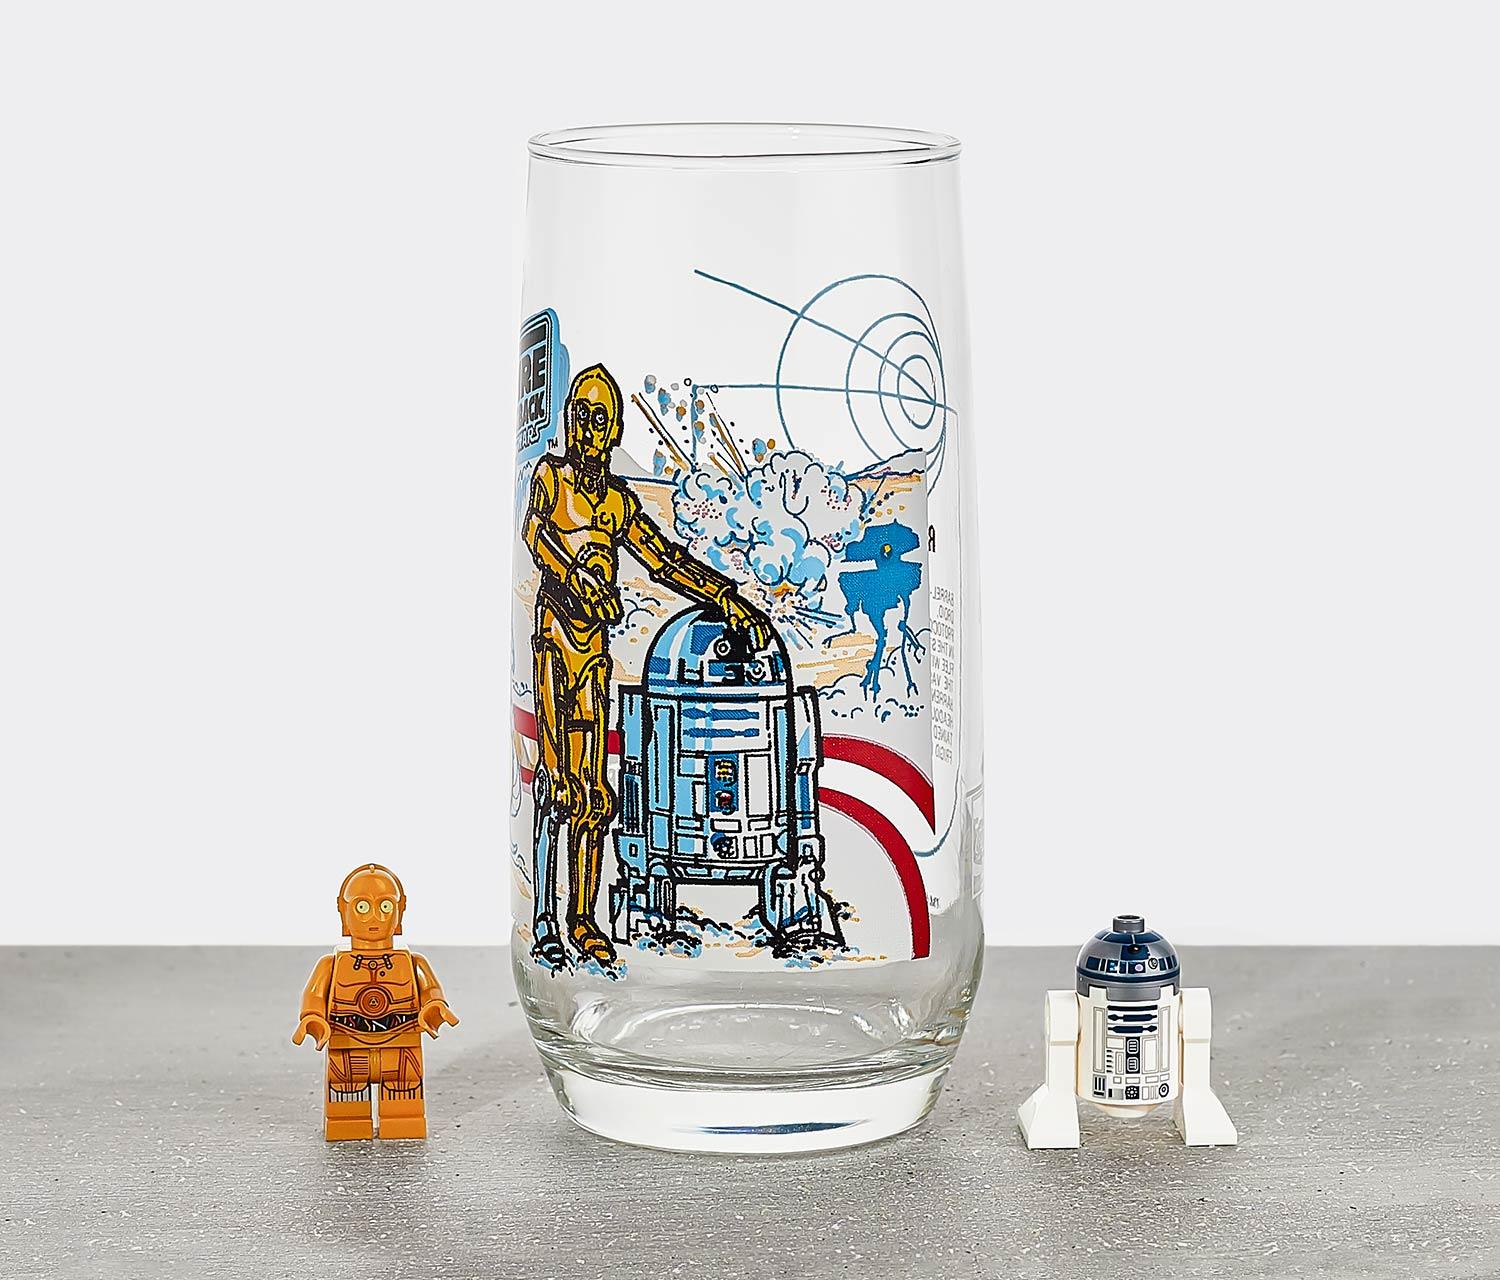 Star Wars Glass Set - R2D2 & C3P0 - Collectible Gift Set of 2 Cocktail  Glasses - 10 oz Capacity - Classic Design - Heavy Base: Mixed Drinkware Sets